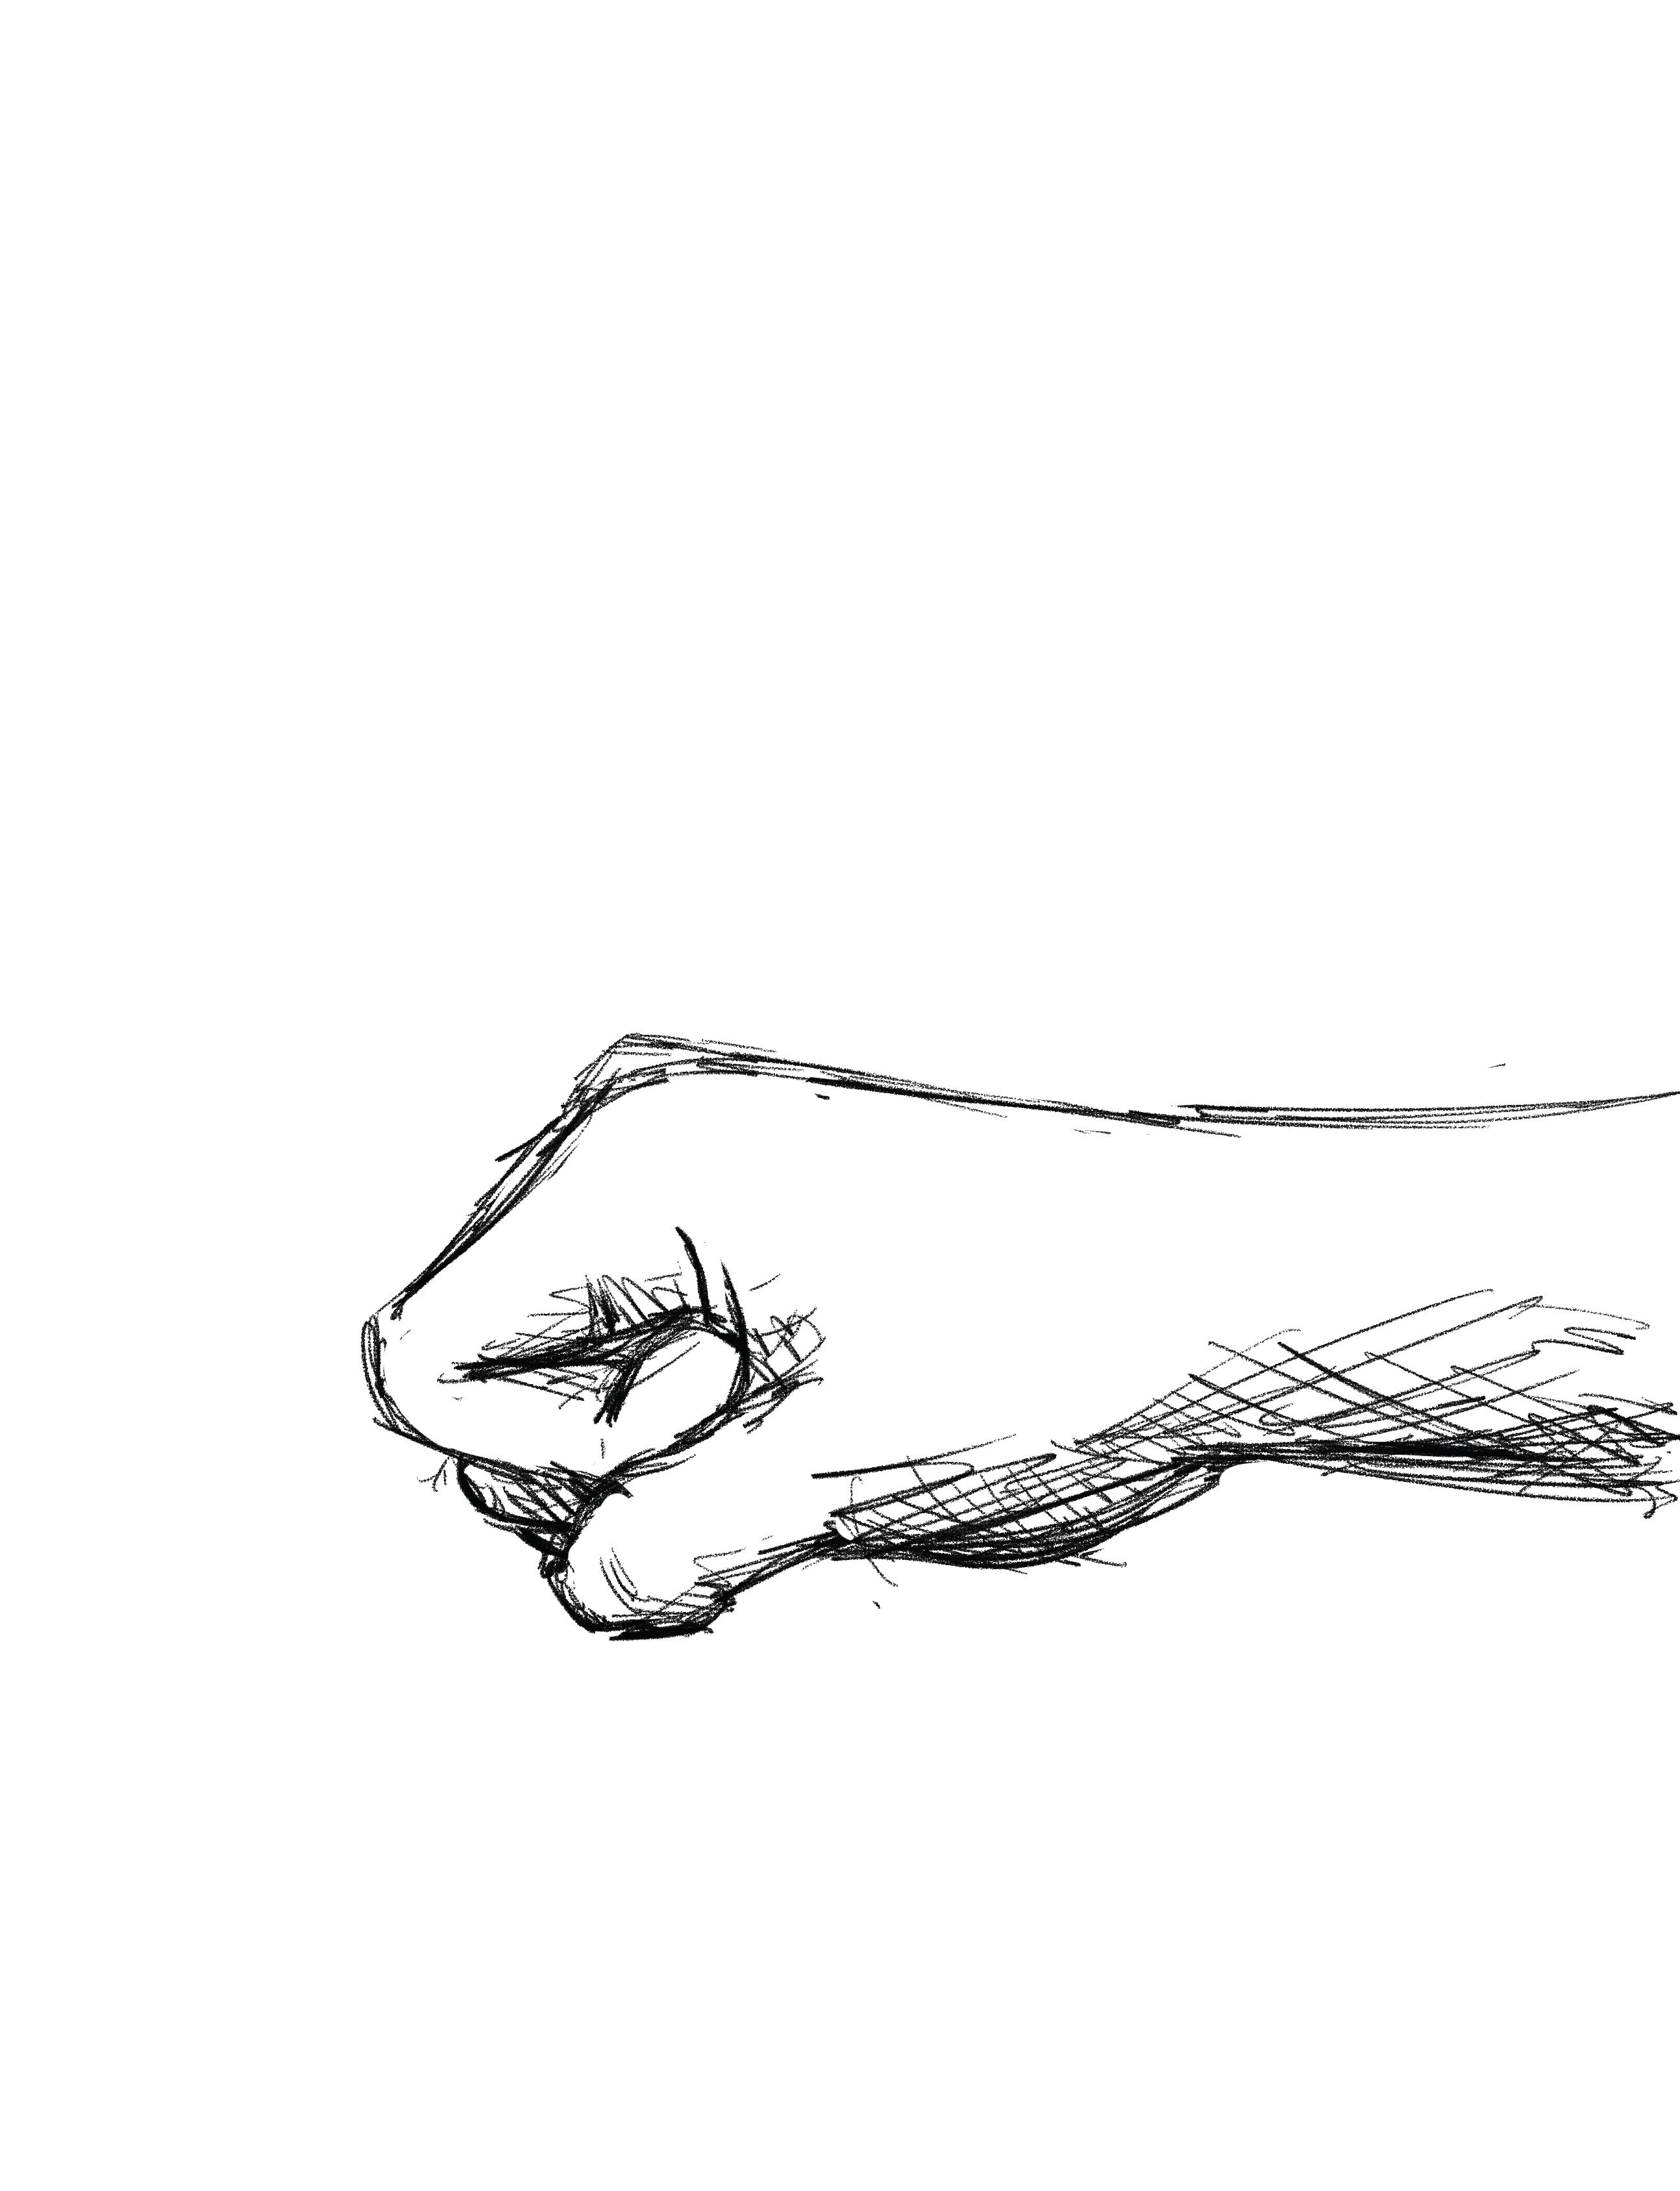 Sketch hand holding picking take or receive Vector Image